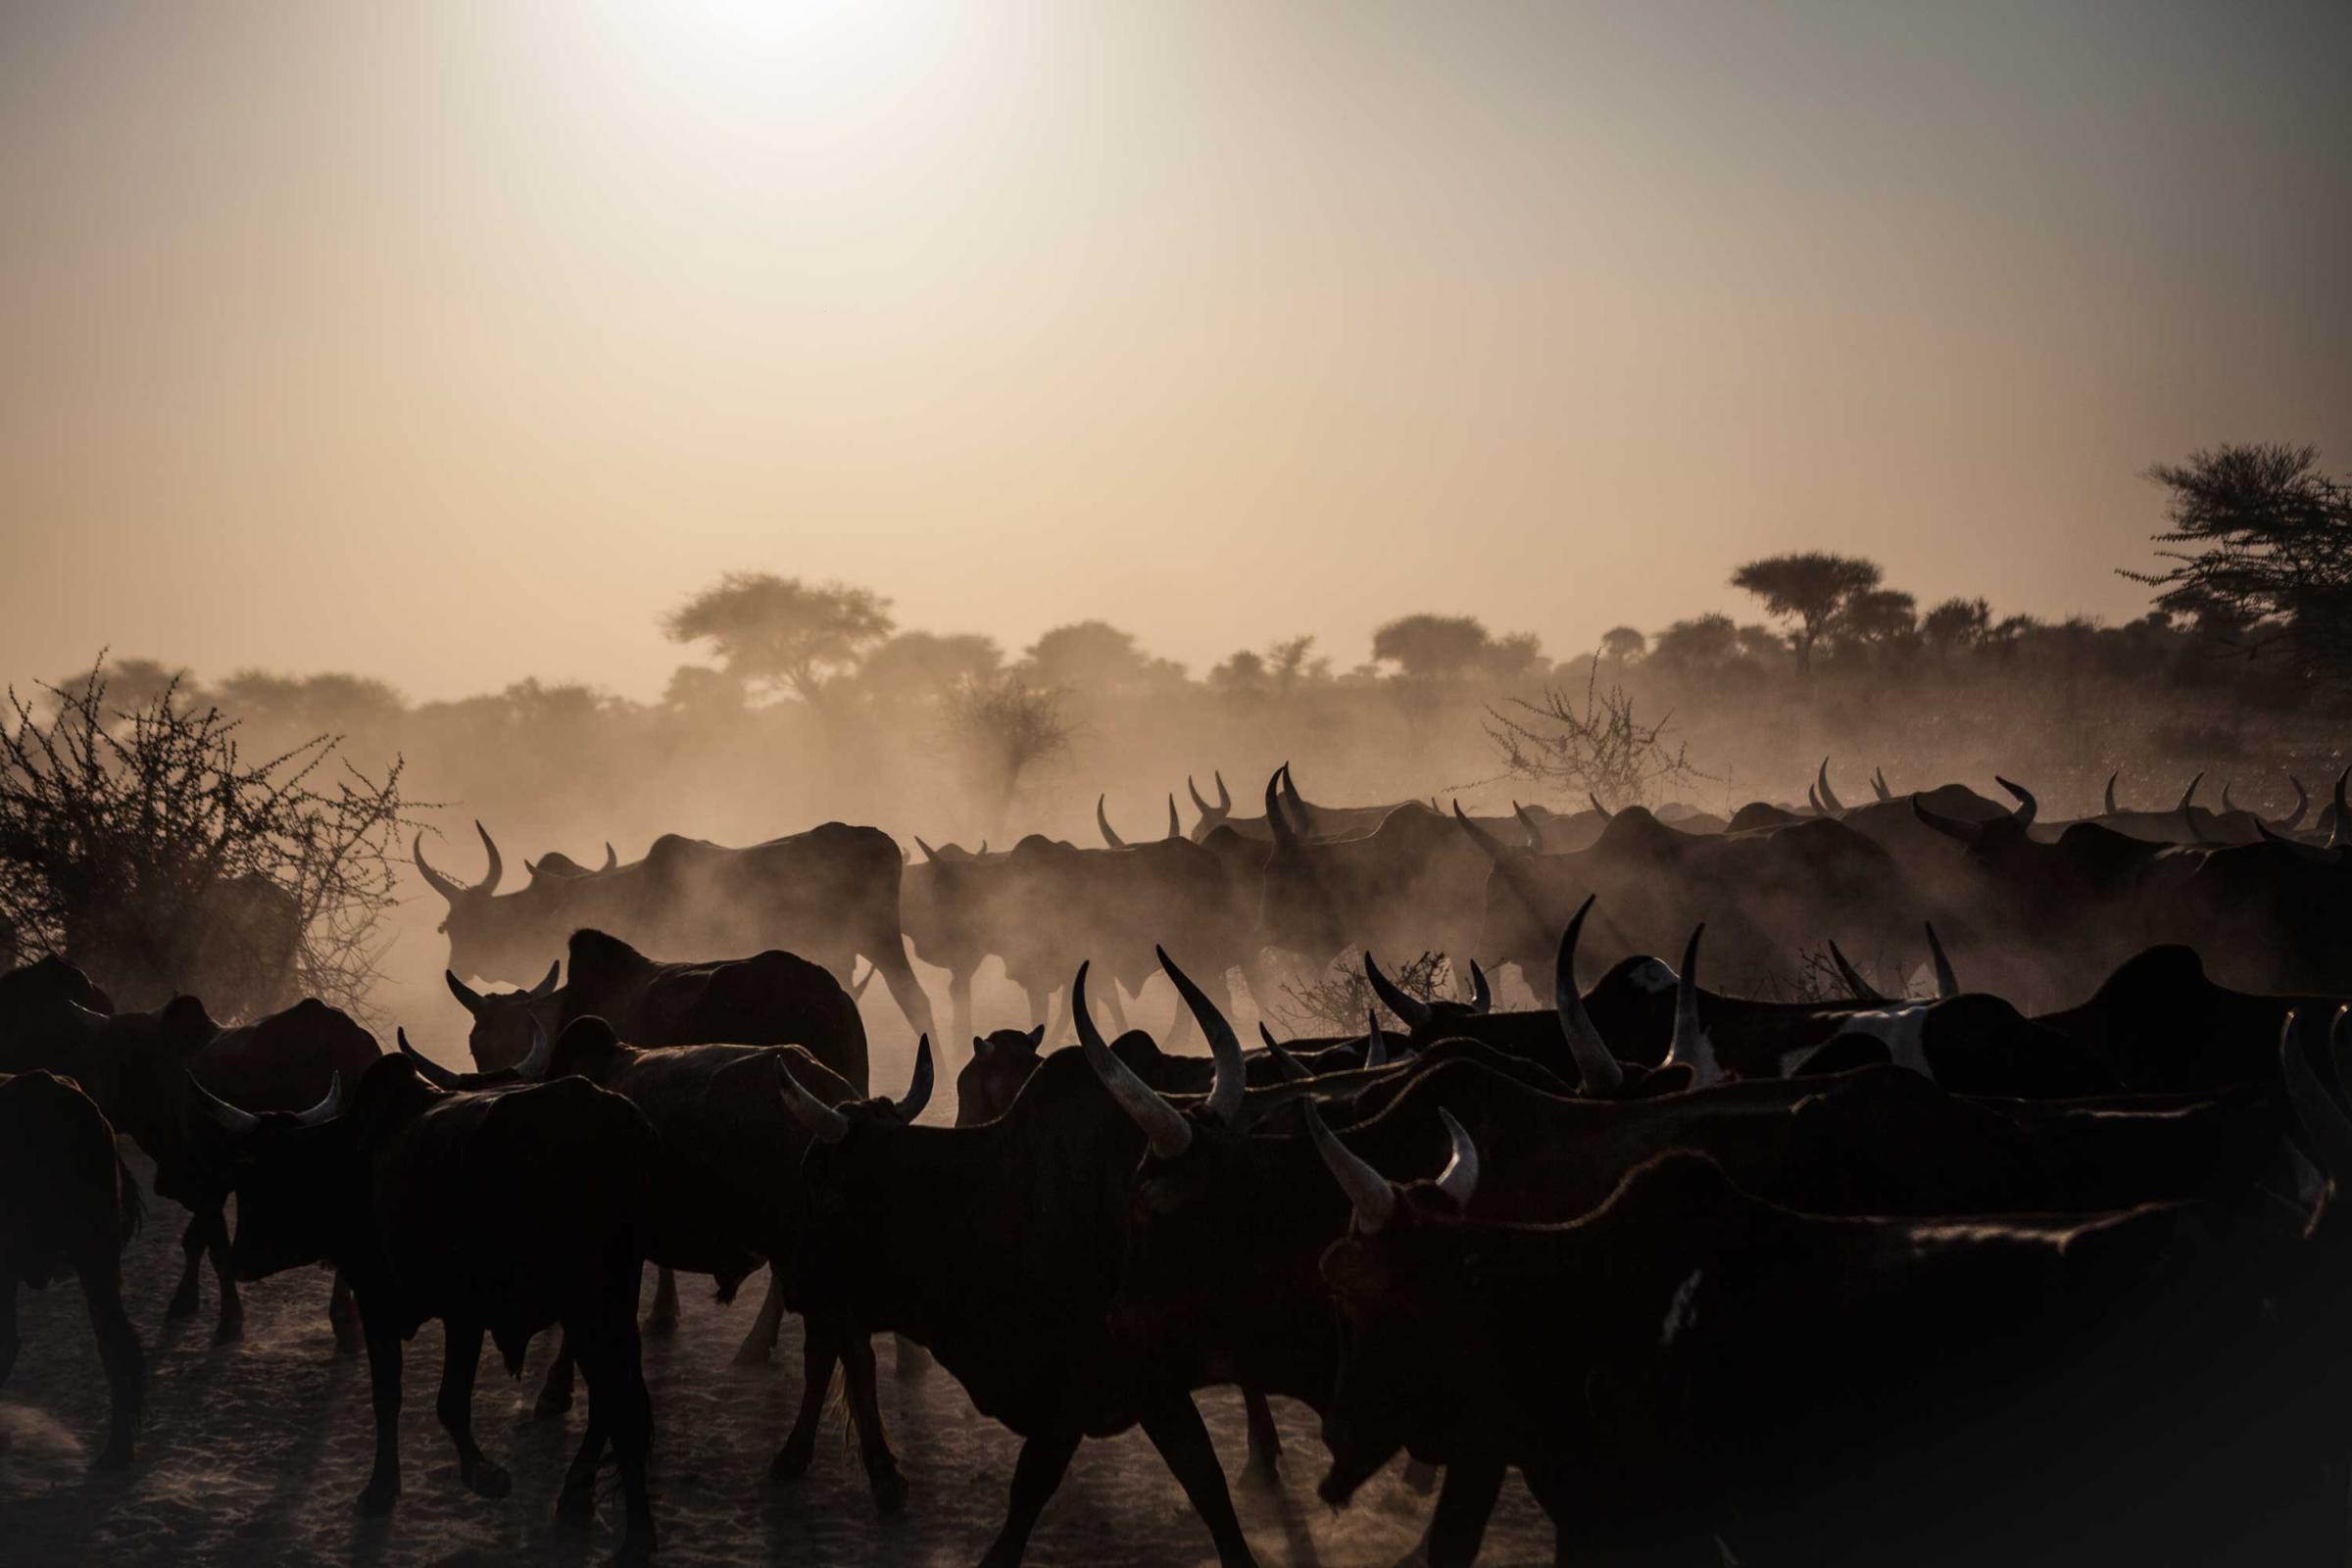 Herders lead their cows from N'djamena, Chad across Niger to be sold on the market in Northern Nigeria.(Jane Hahn)